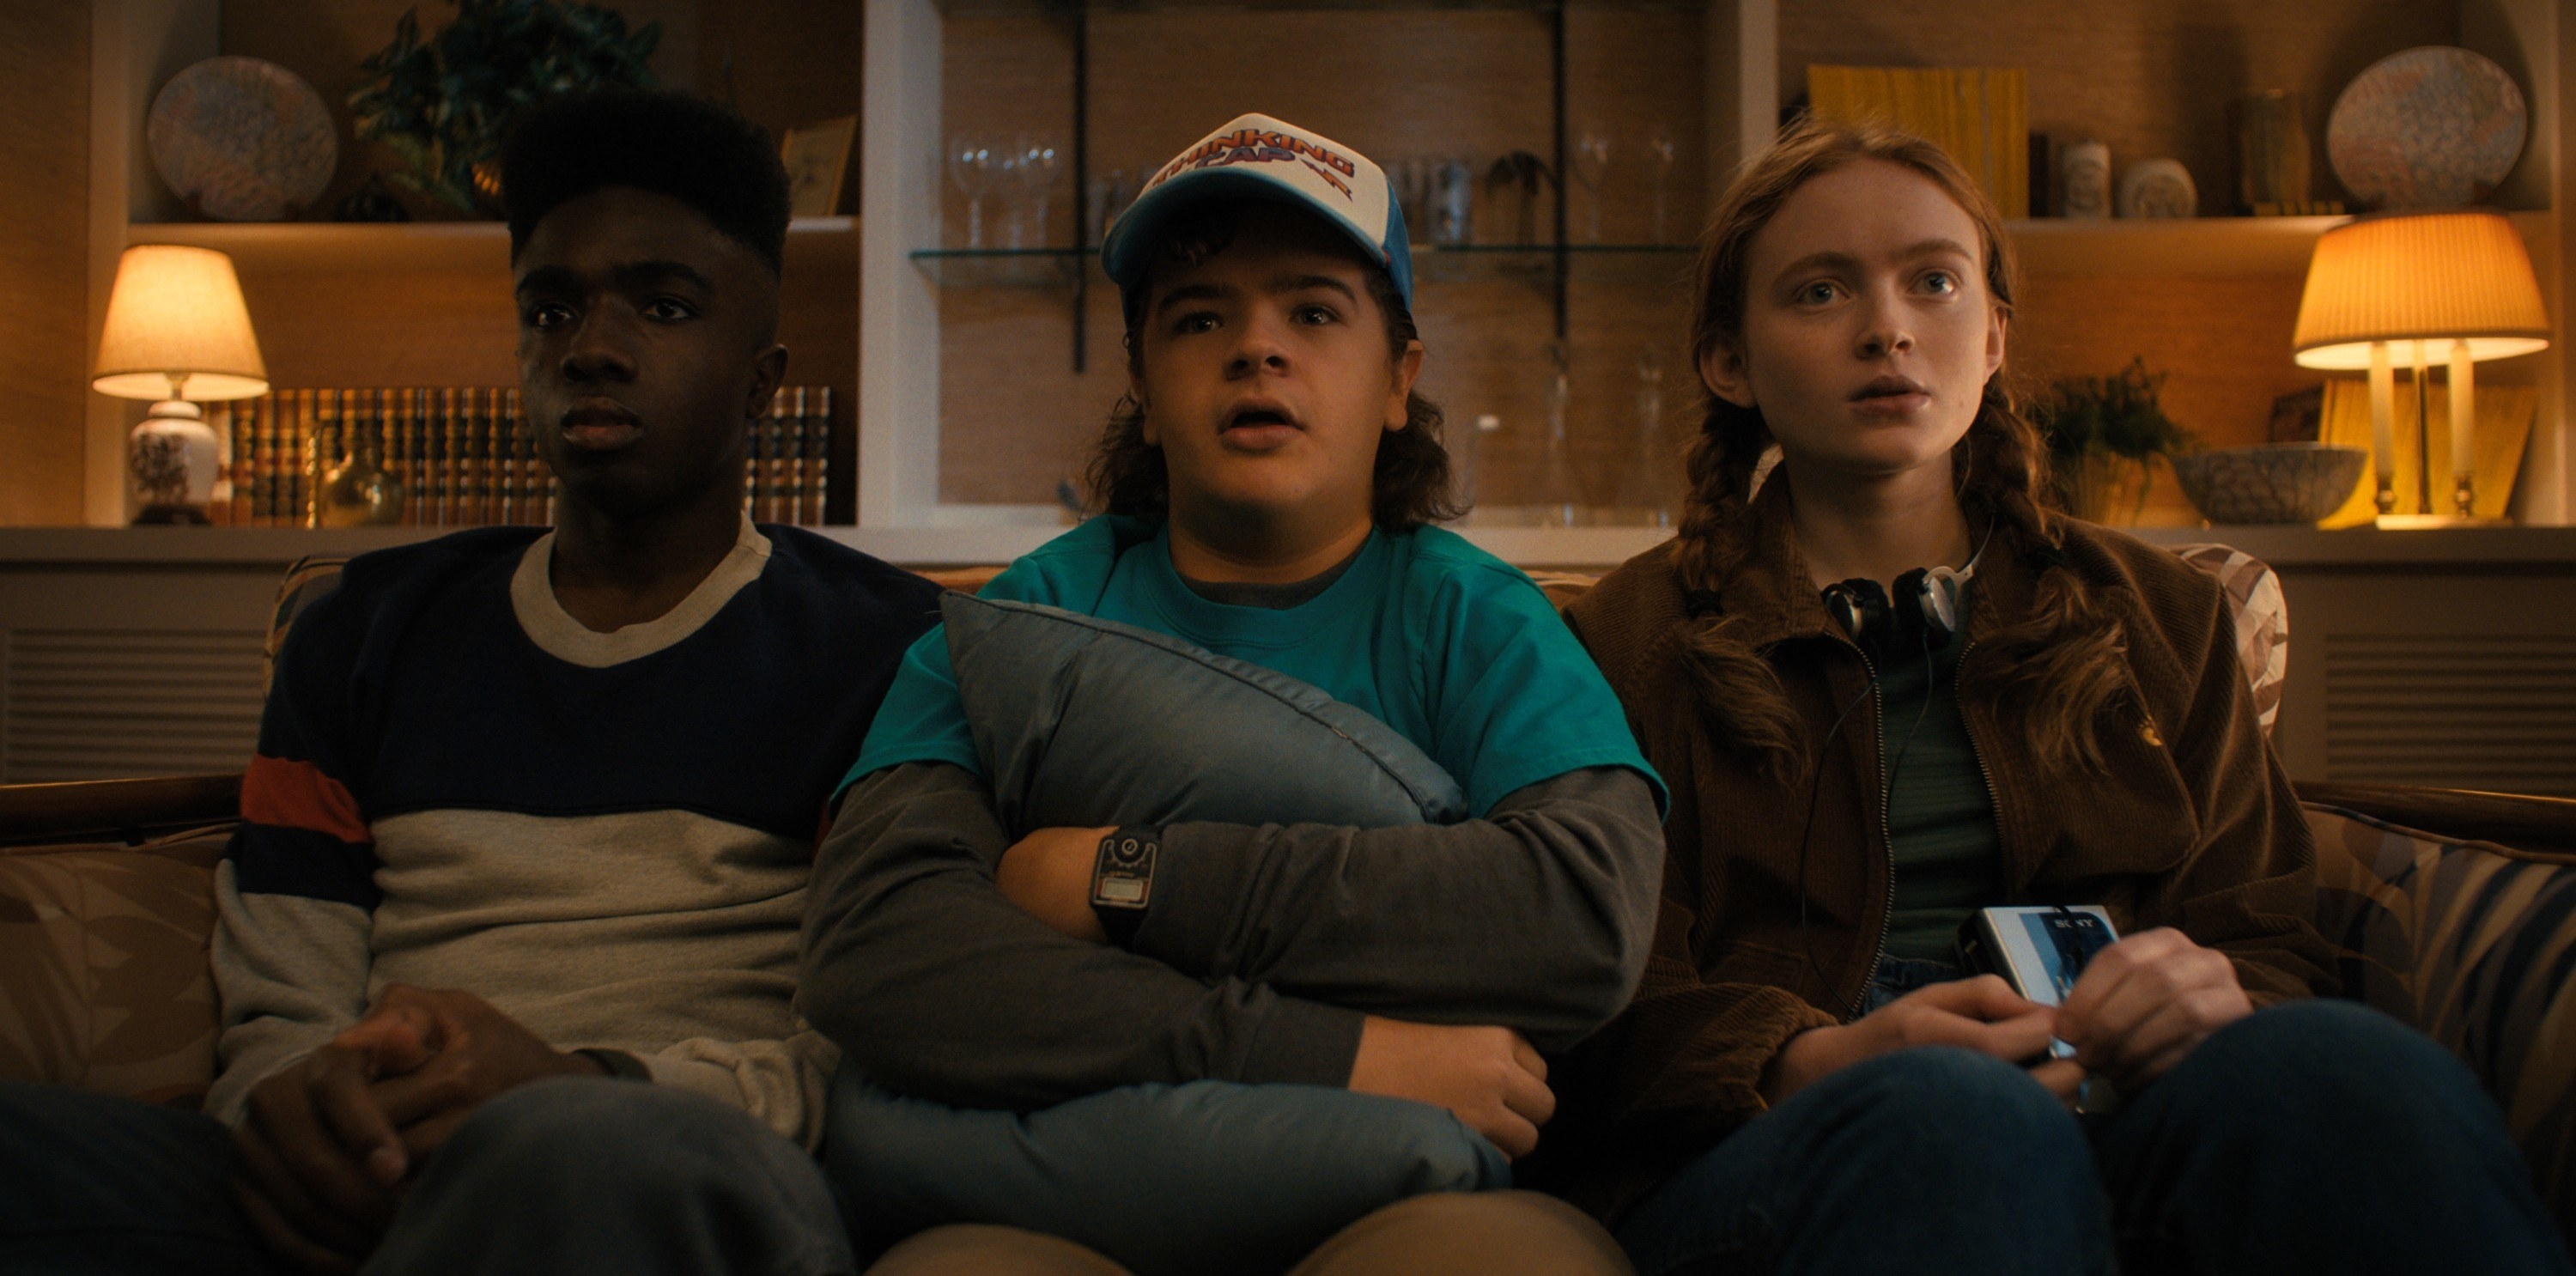 Here's How You Can Audition For Season 5 of 'Stranger Things